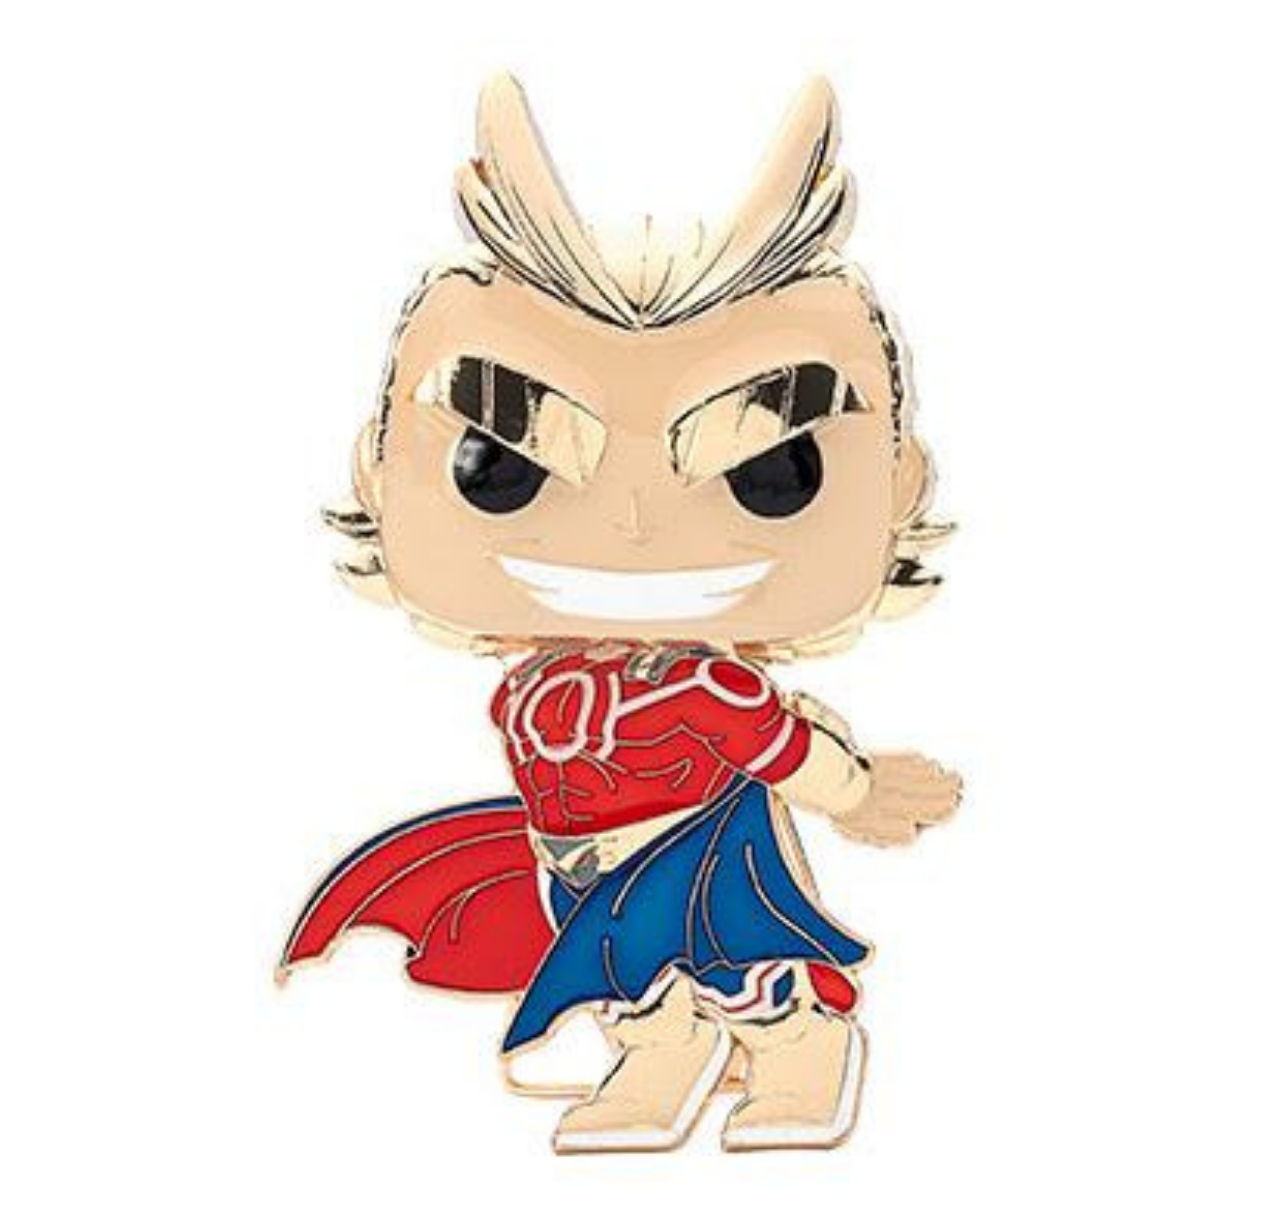 Funko Pop! Pins: My Hero Academia- Silver Age All Might Chase Variant Enamel Pin